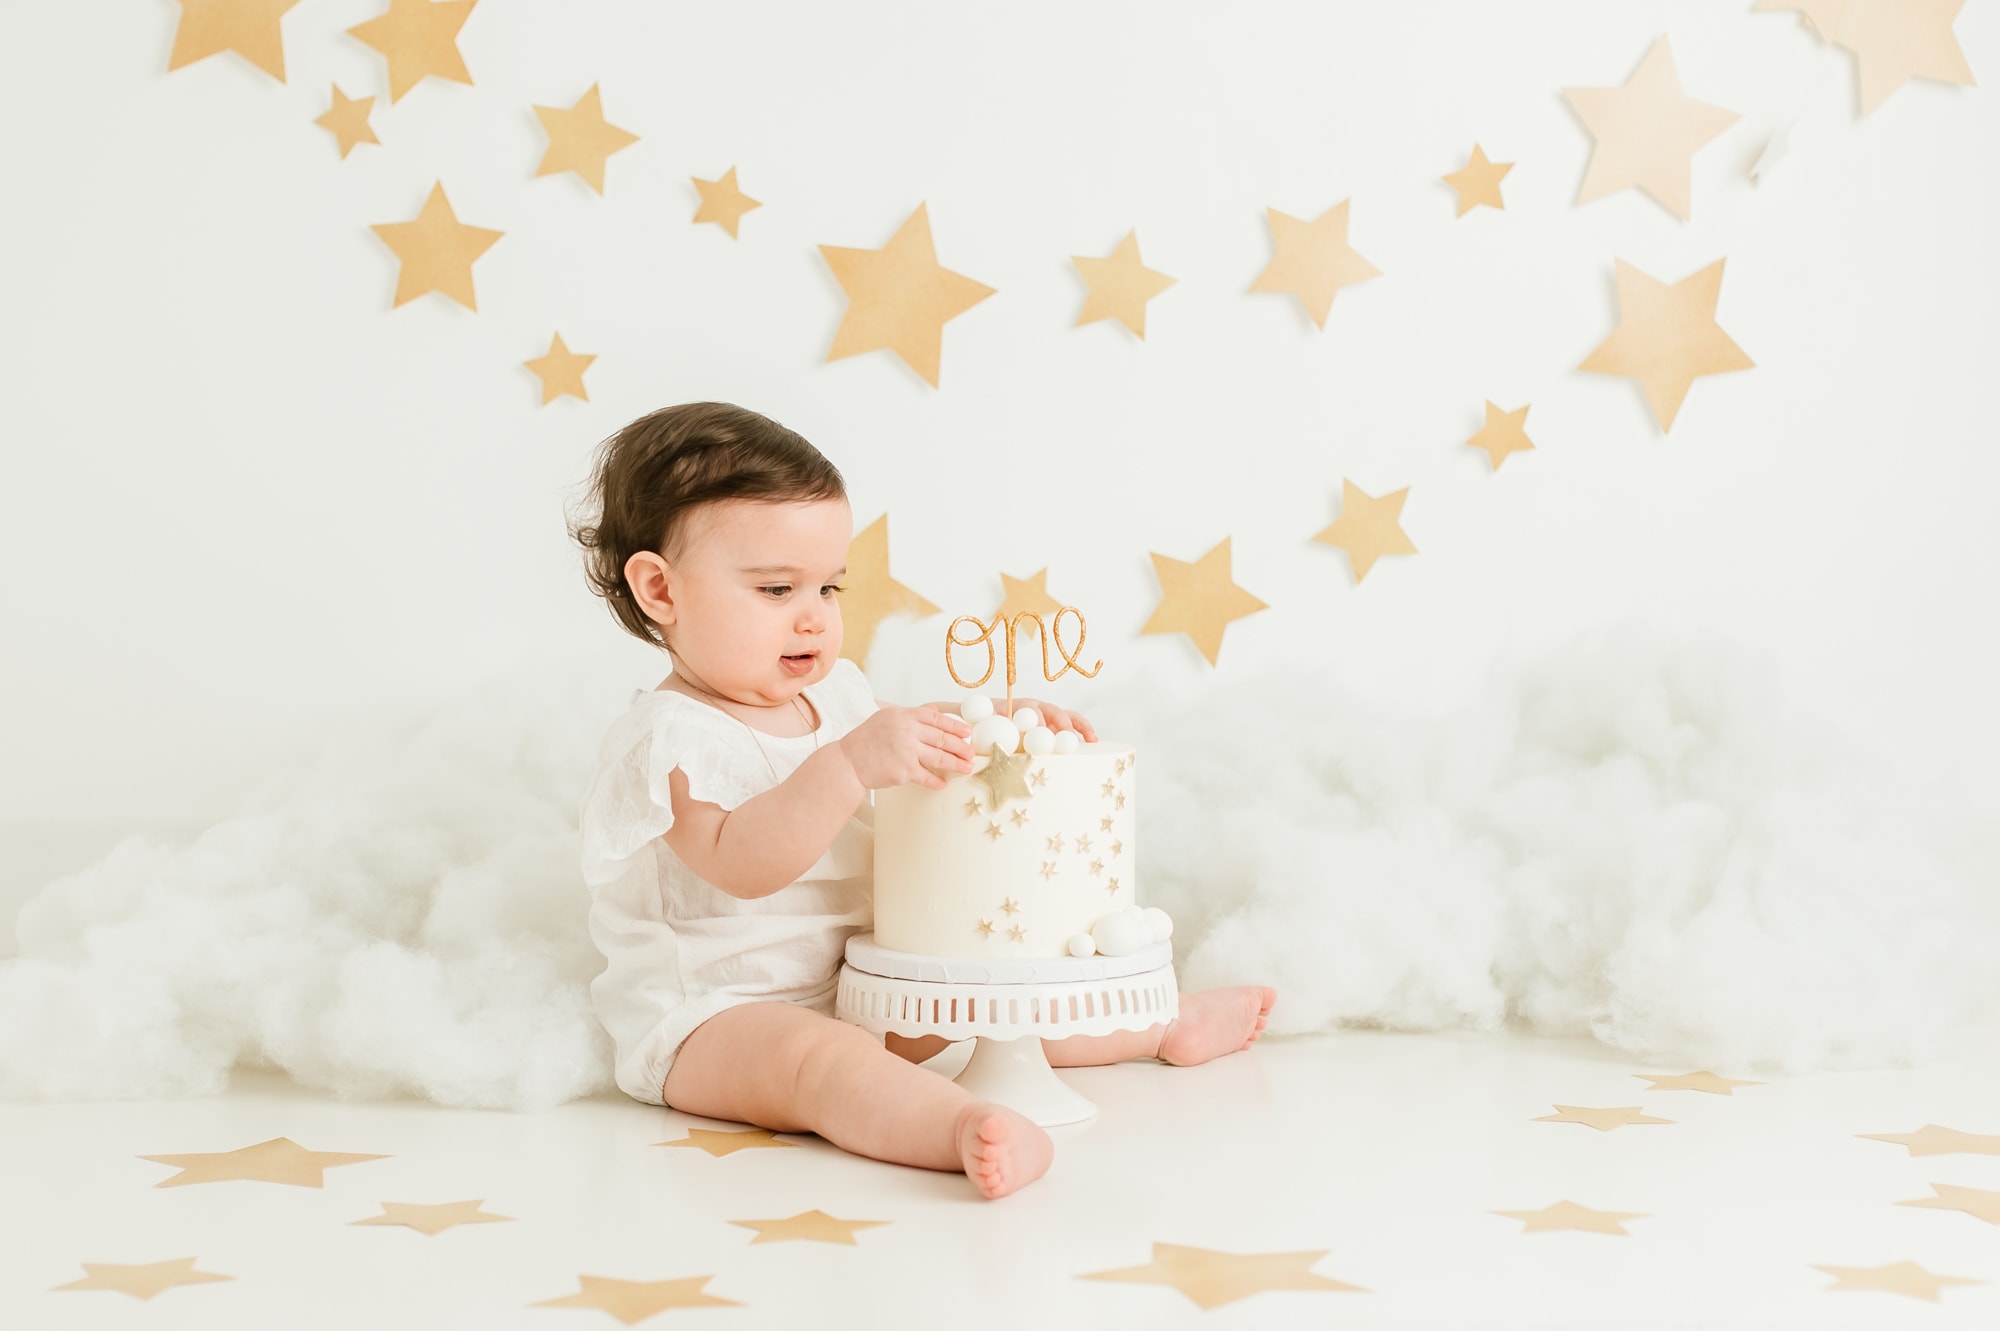 Girl reaching for a smash cake, with a cloud and stars background in white and gold.